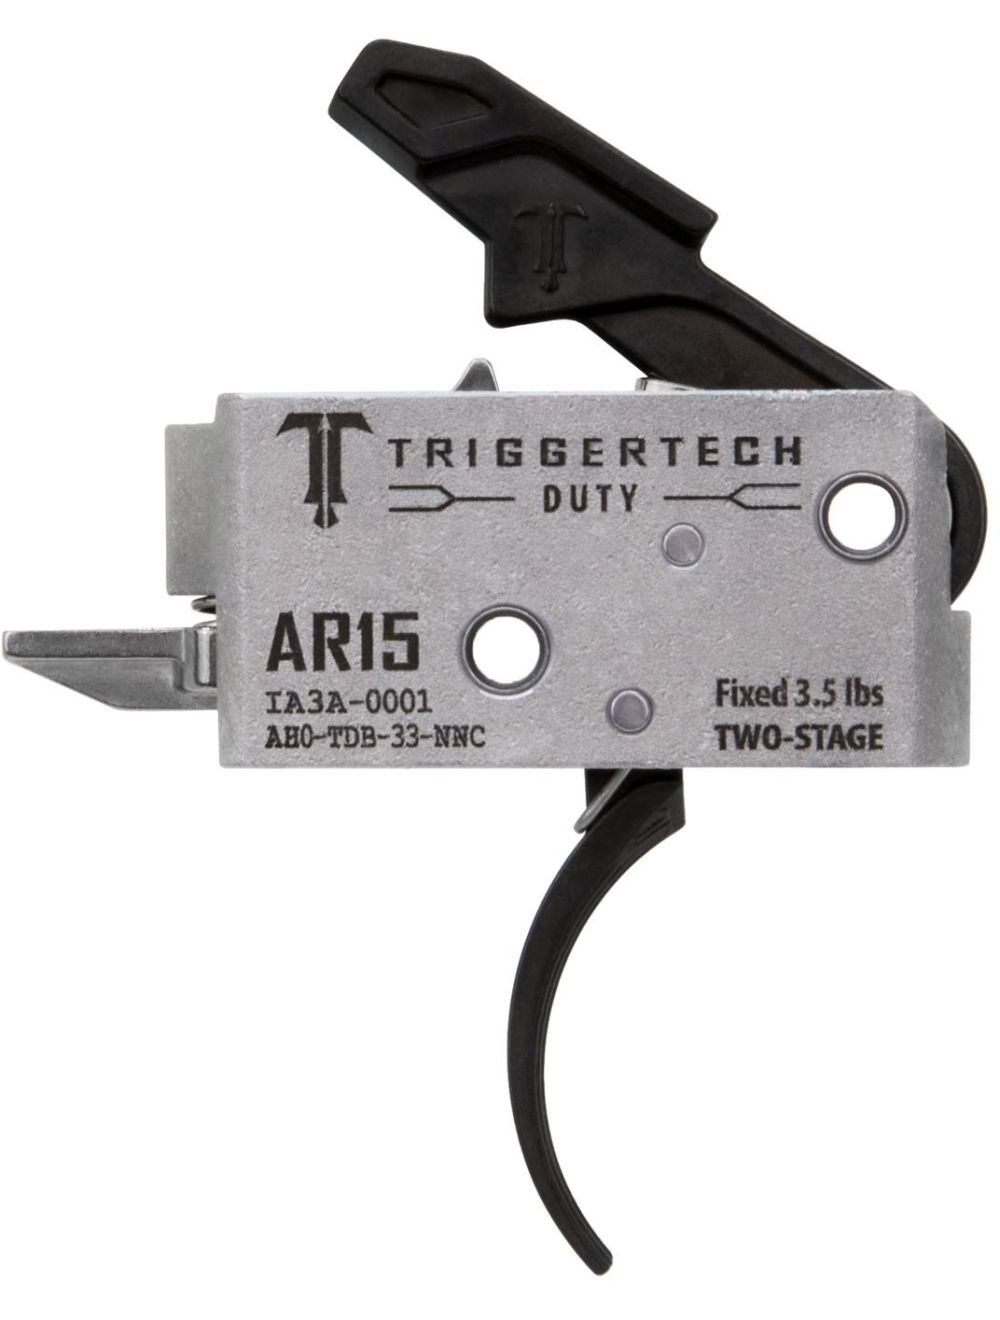 AR15 Two-Stage Trigger